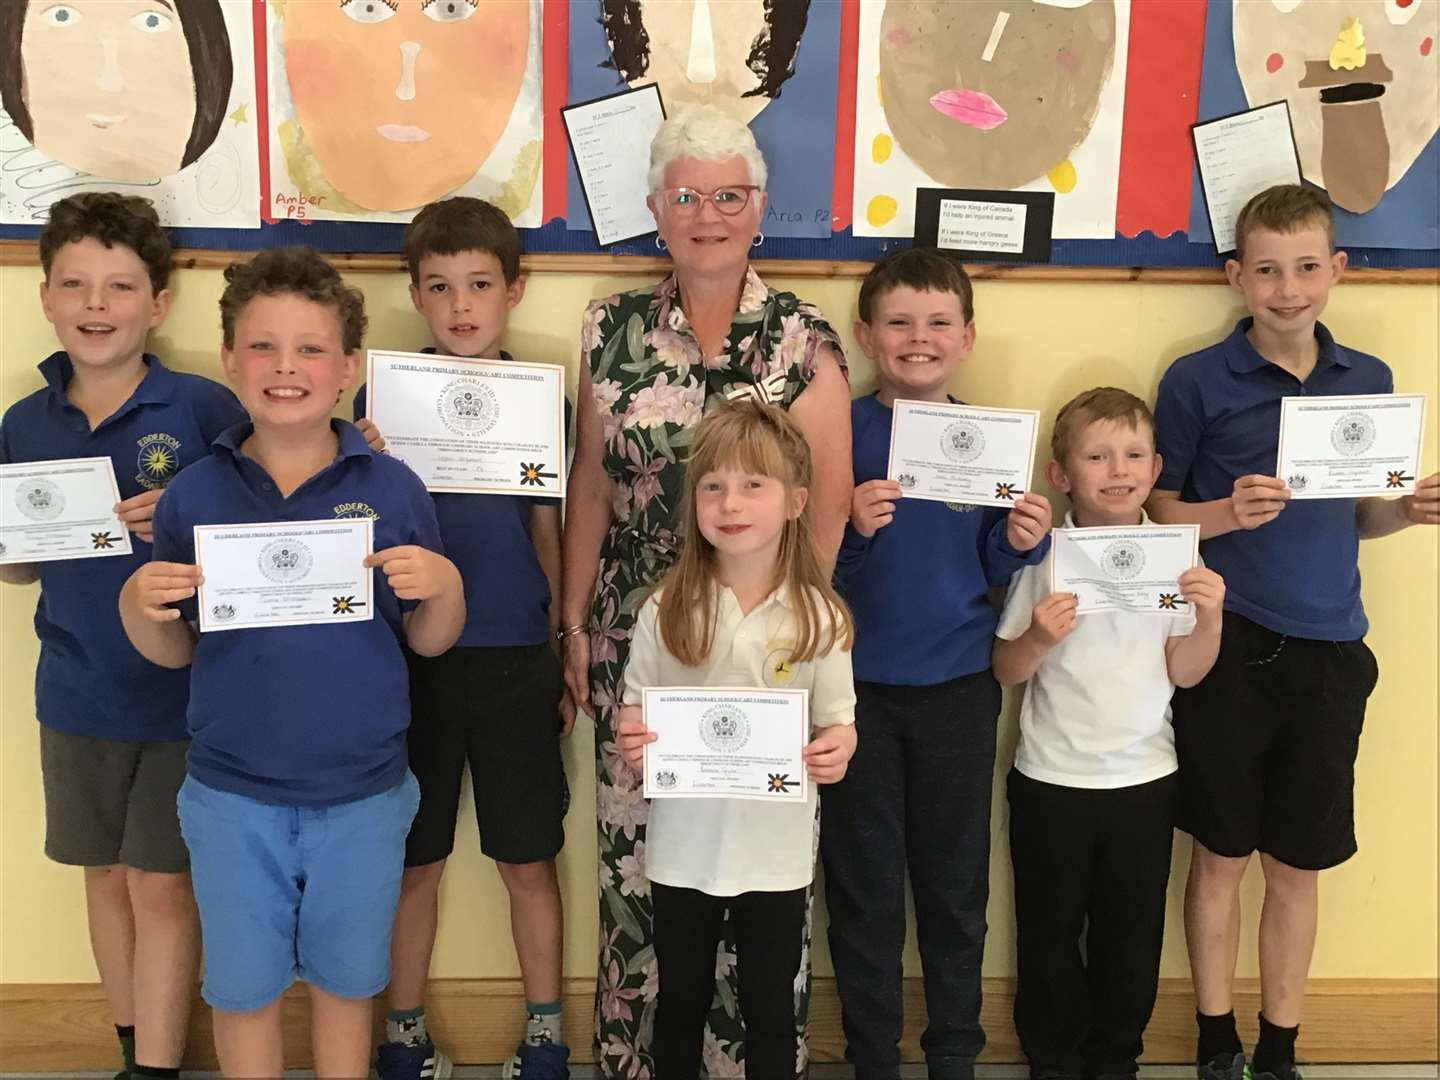 Edderton Primary School pupils received their certificates from Deputy Lieutenant Christine Mackay. The p1-3 class was won by Rebecca Taylor and the p4-7 class by Finlay McMeeken. Head teacher's certificates were also presented.